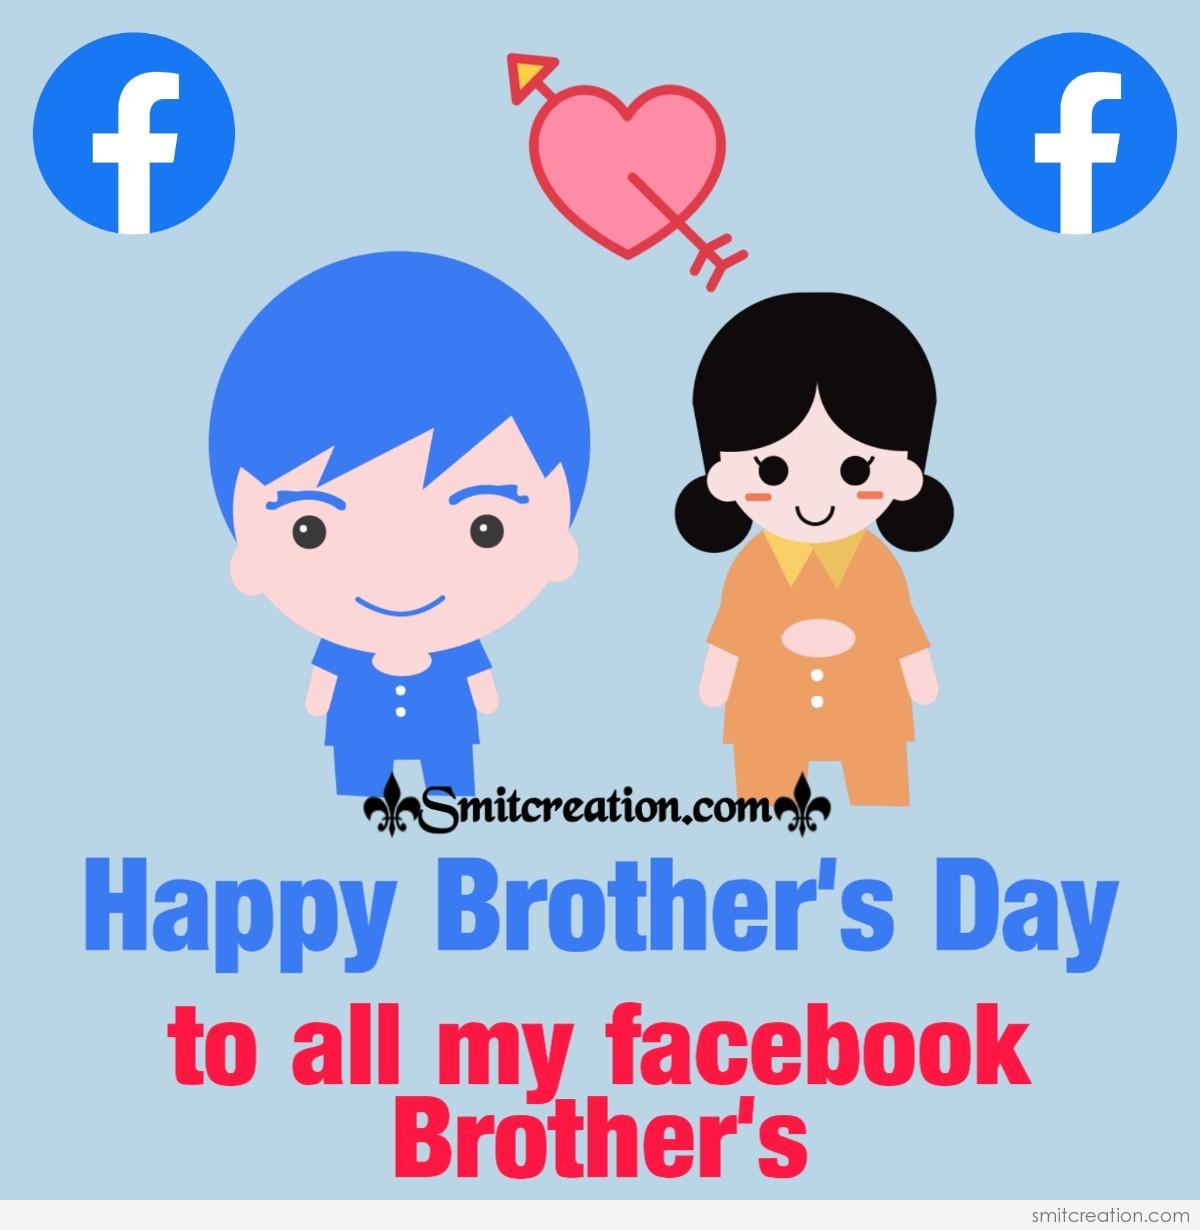 40+ Brothers Day - Pictures and Graphics for different festivals